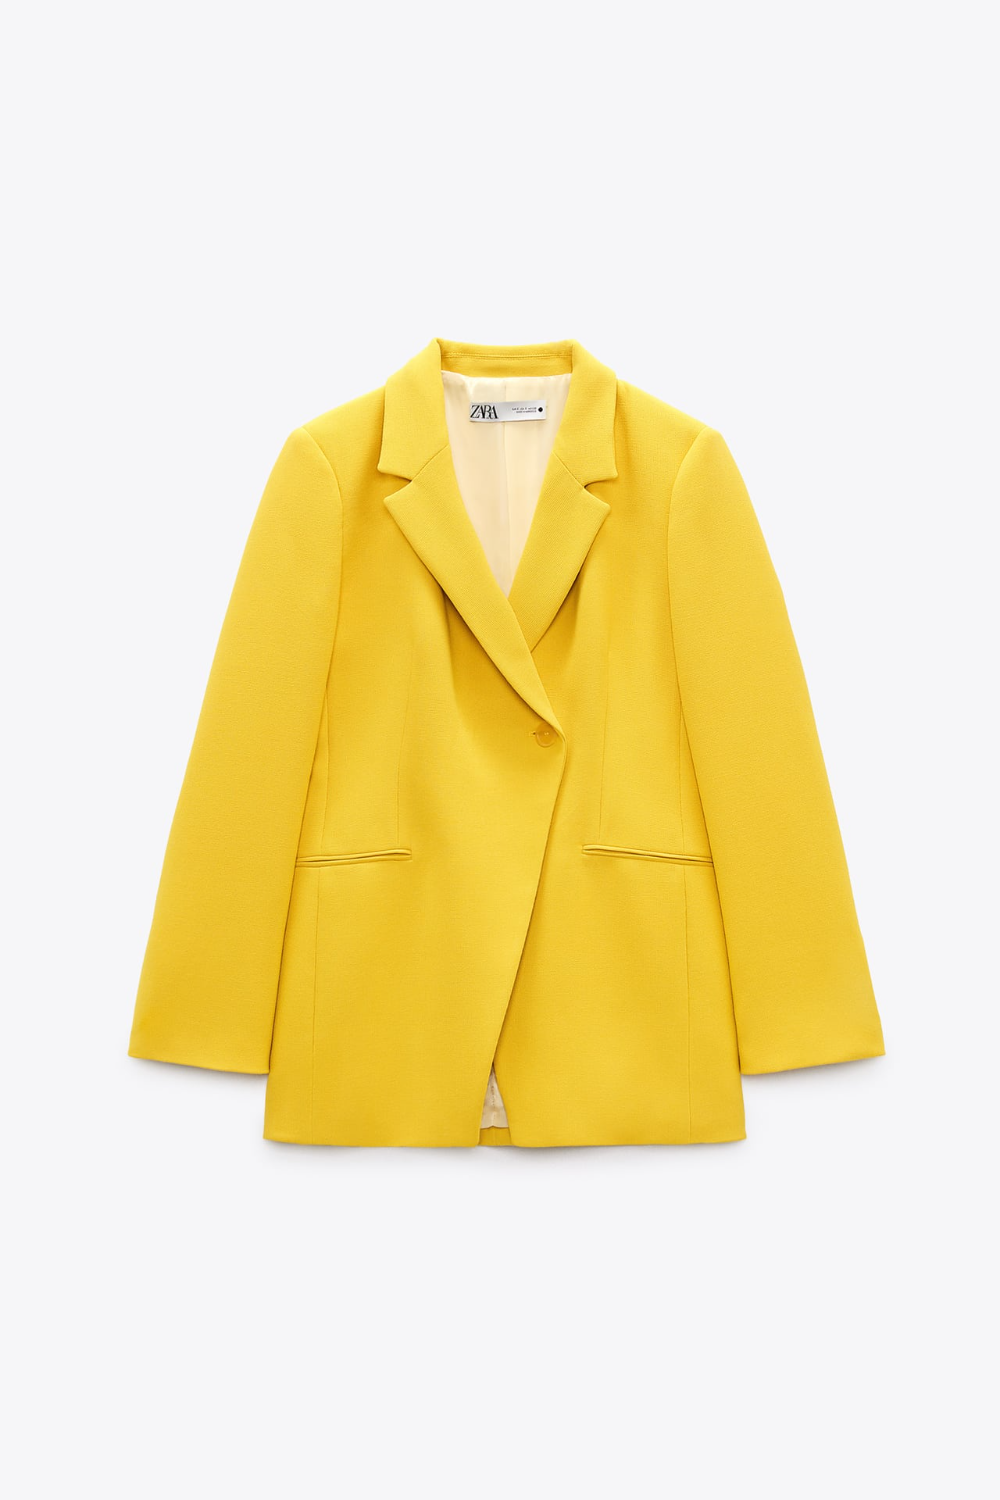 https://flyfiercefab.com/wp-content/uploads/2022/05/Zara-yellow-Double-breasted-blazer.png